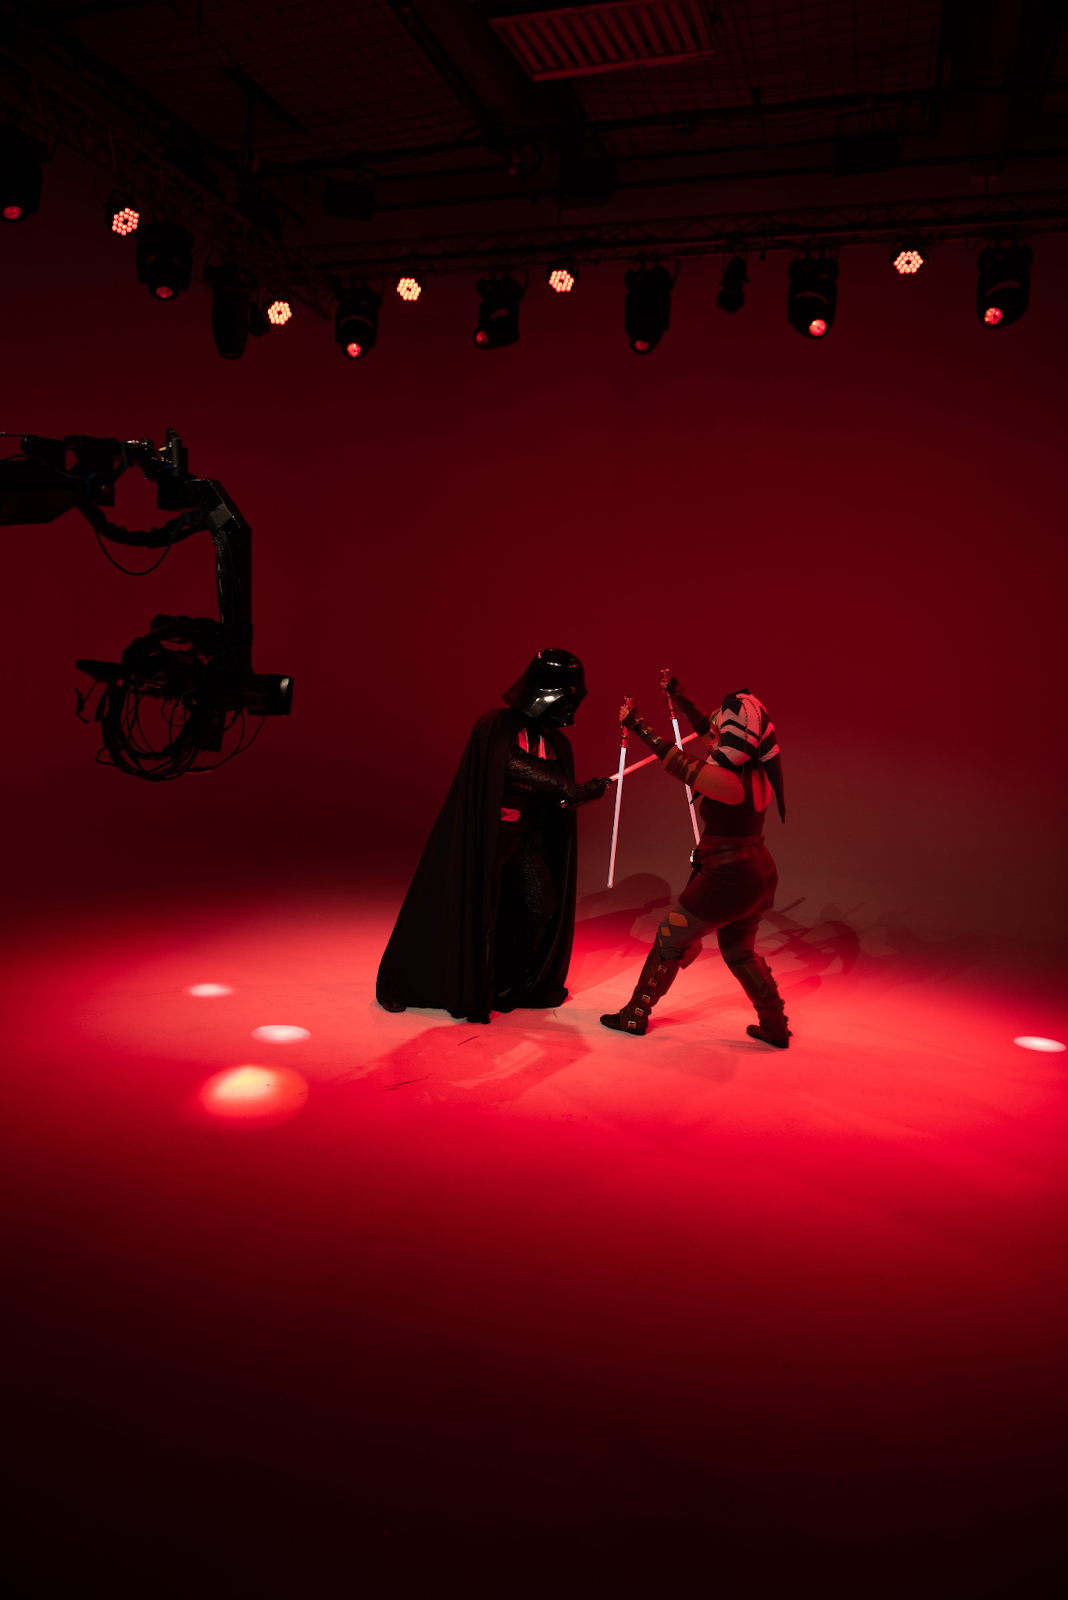 Star Wars Characters in Action Against a Red Background